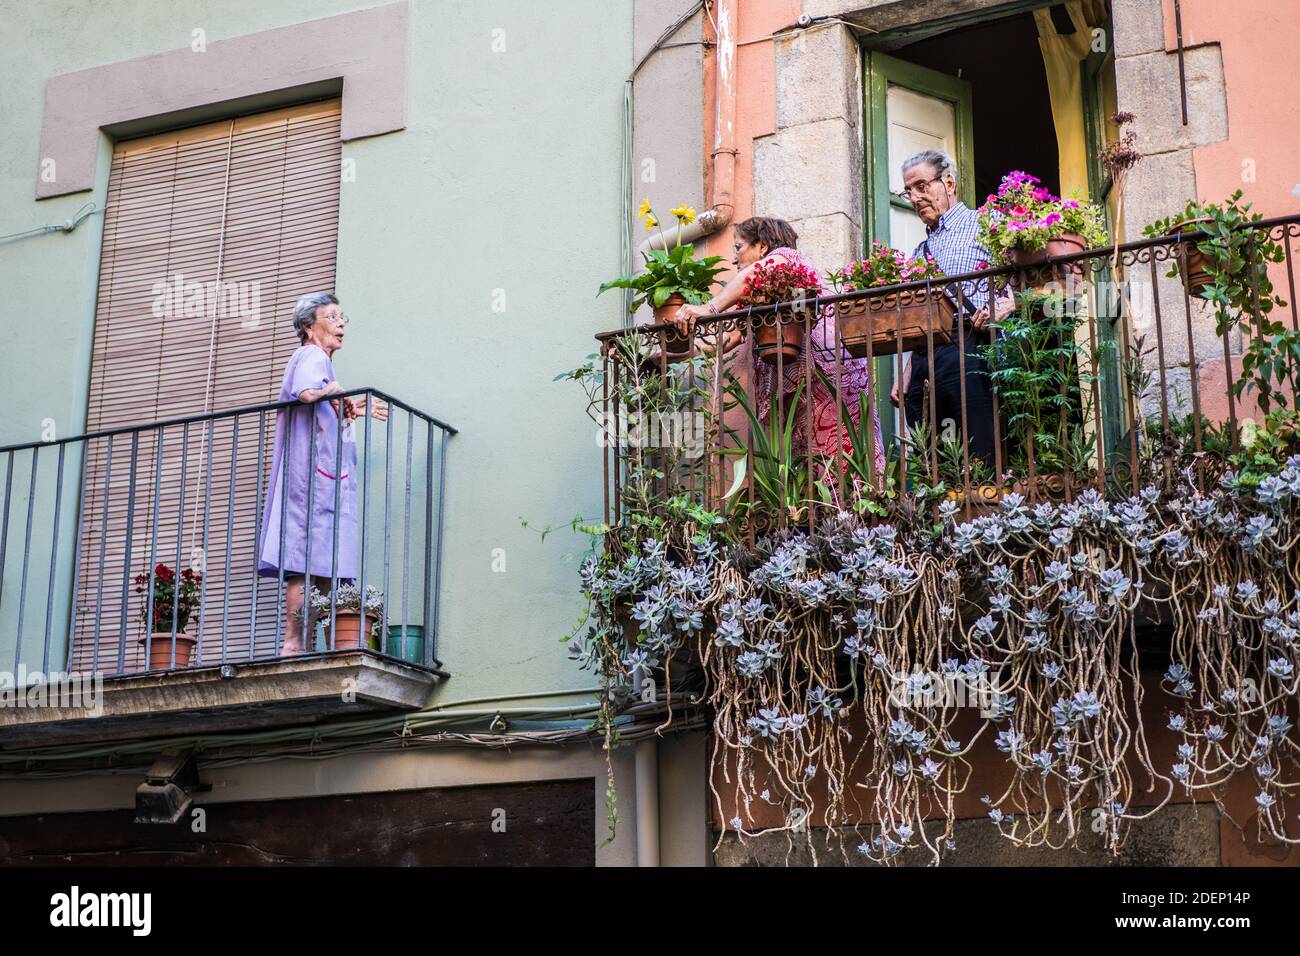 Local people on the balcony in the Girona, Catalonia, Spain, Europe. Stock Photo